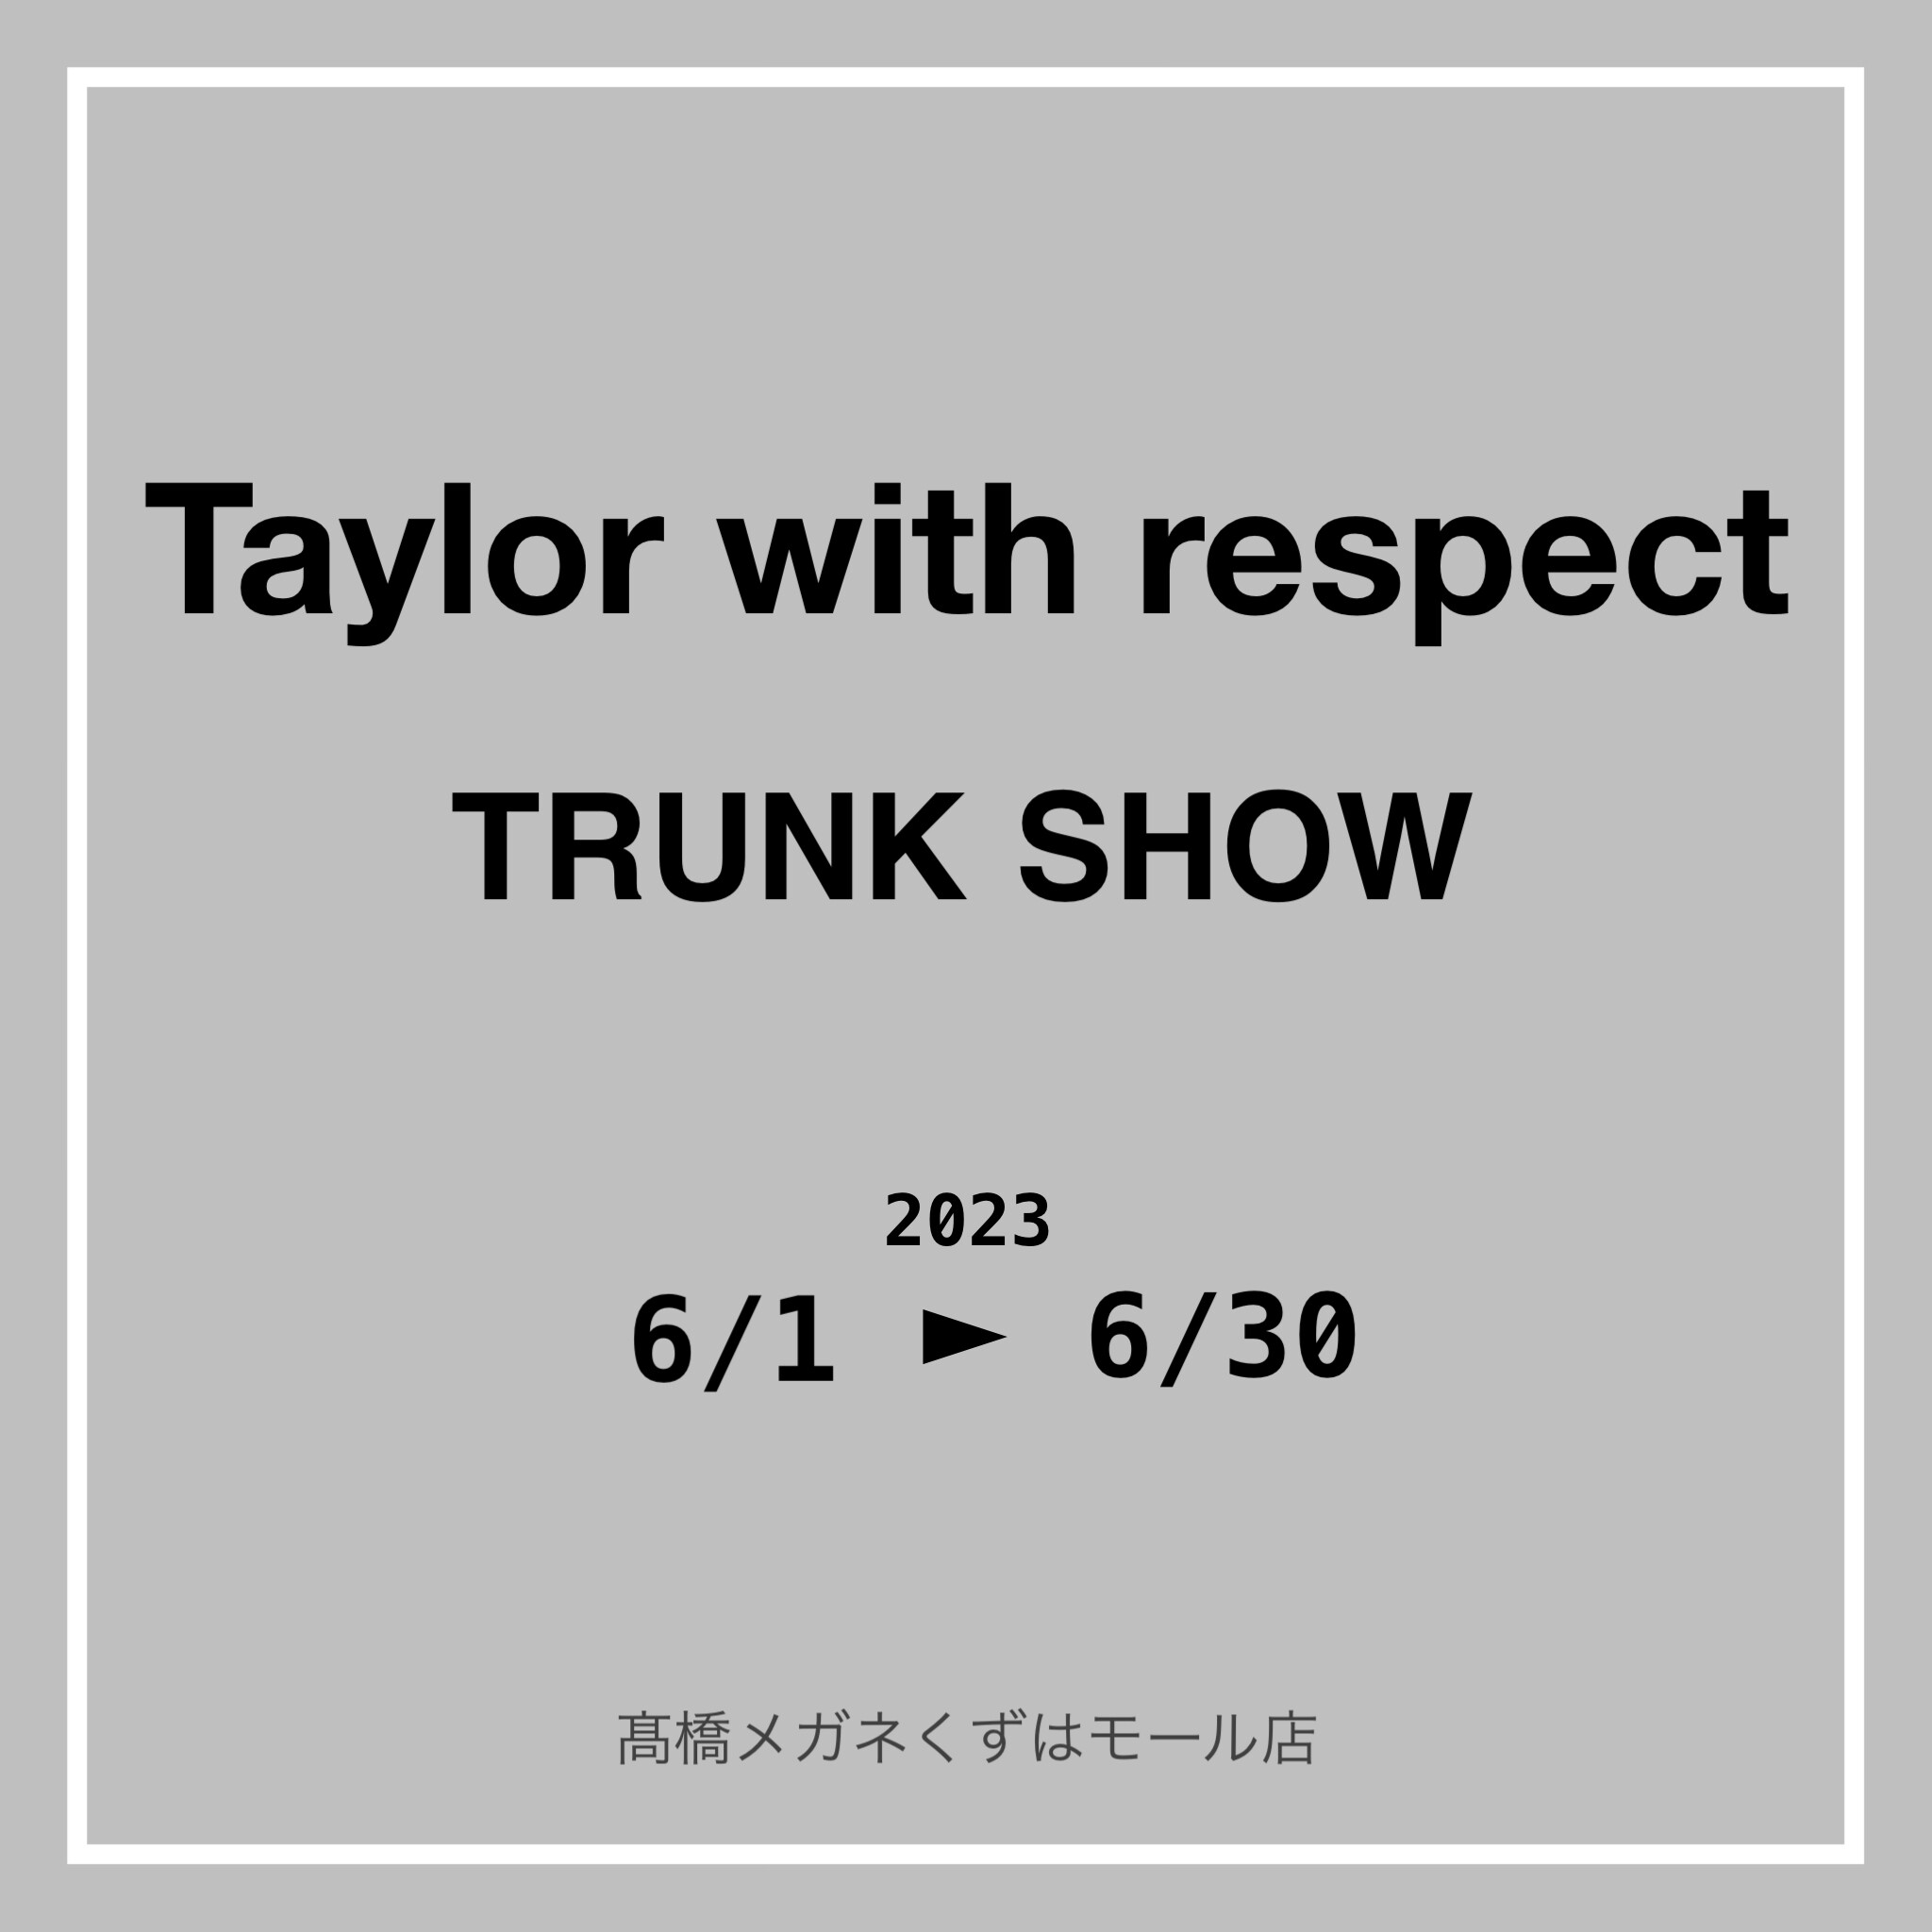 Taylor with respect トランクショー開催中！